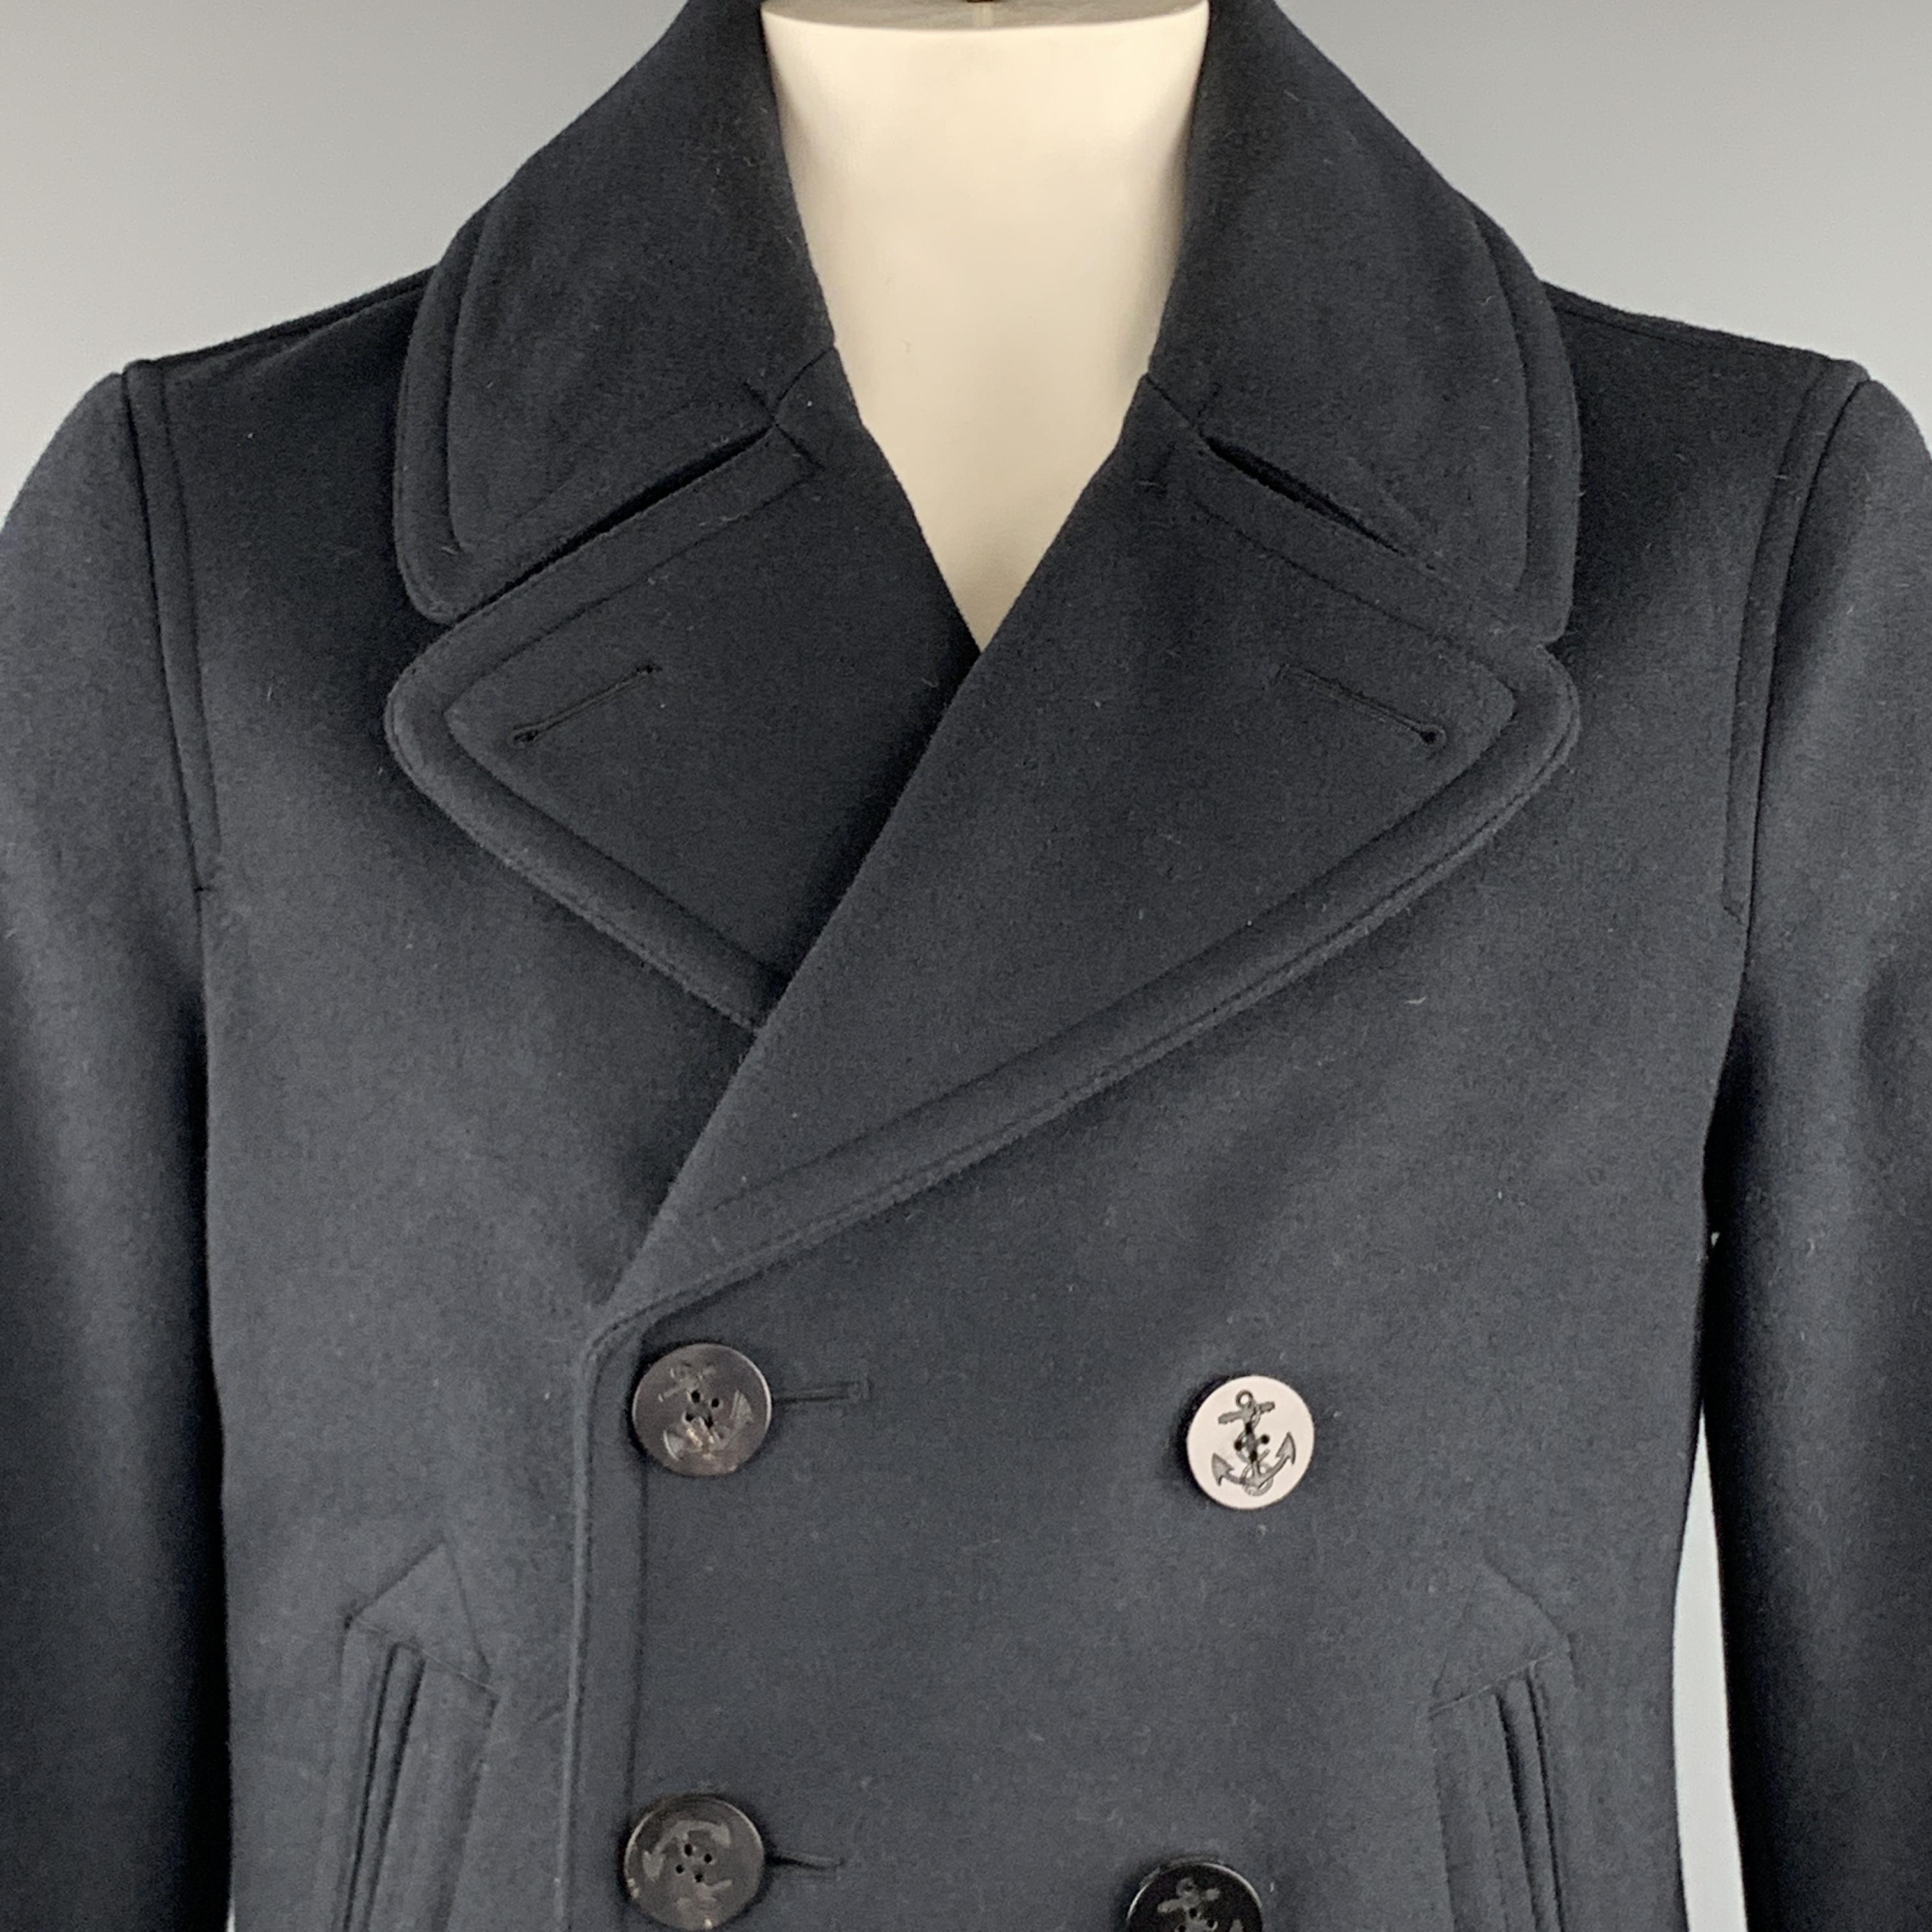 Burberry Peacoat - 2 For Sale on 1stDibs